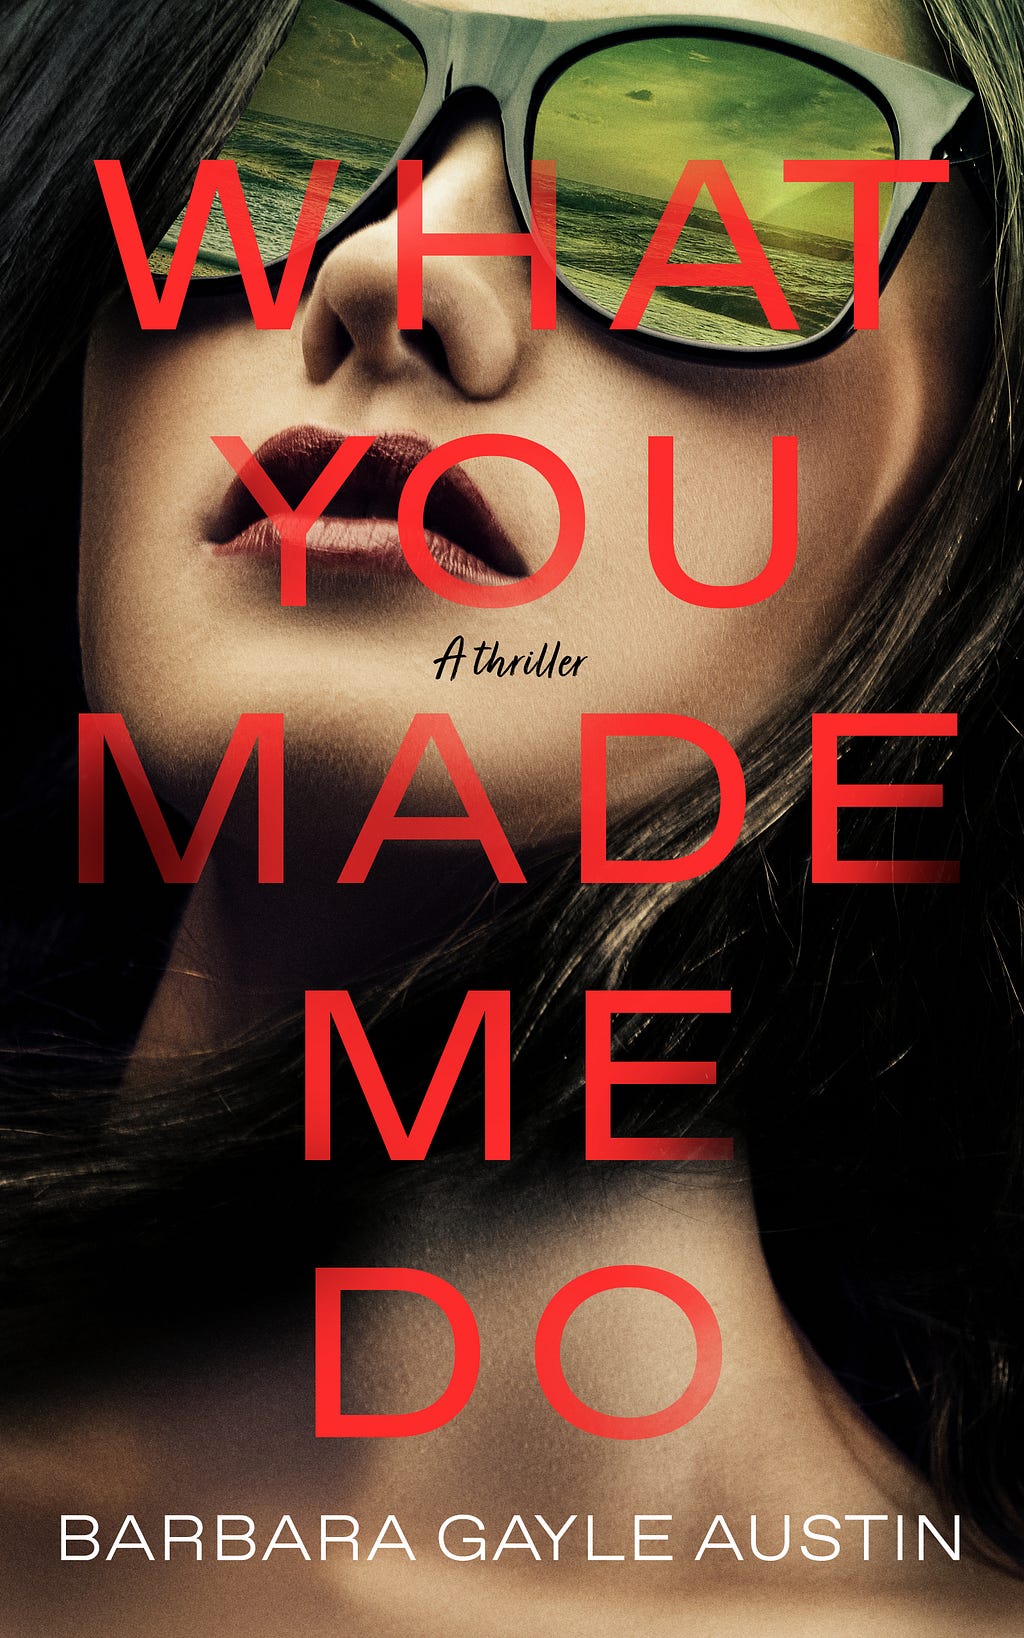 PDF What You Made Me Do By Barbara Gayle Austin